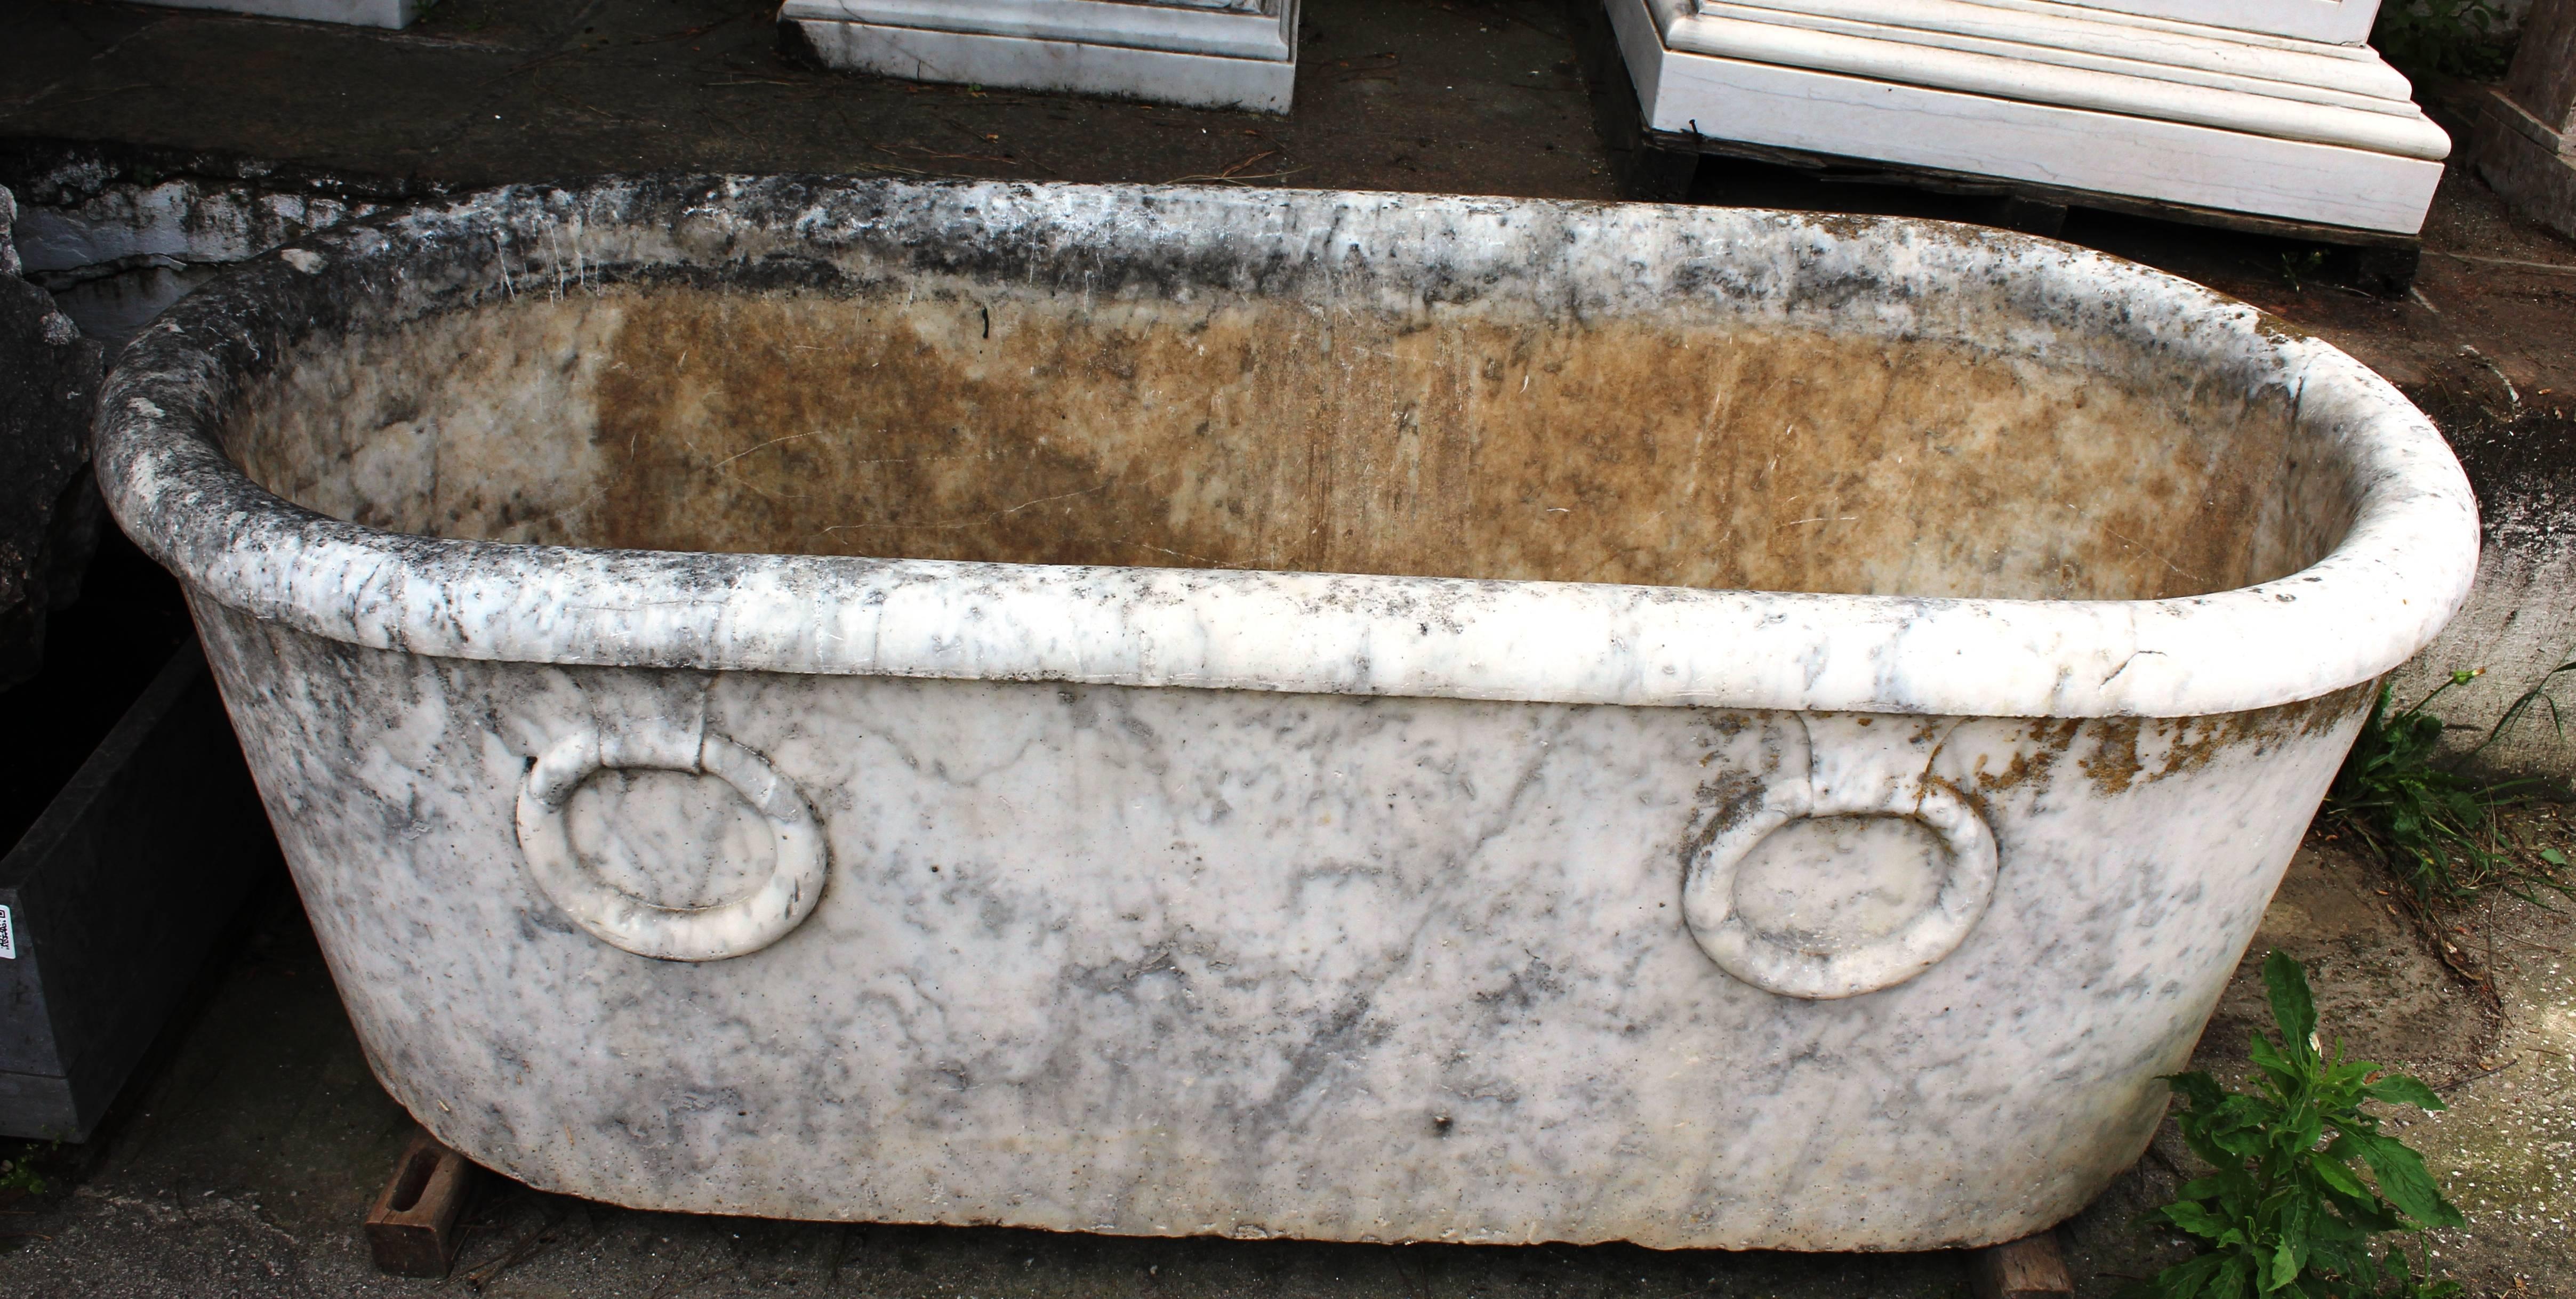 White Carrara marble bath with rings in relief. Architectural antique from a period spa in northern Spain.